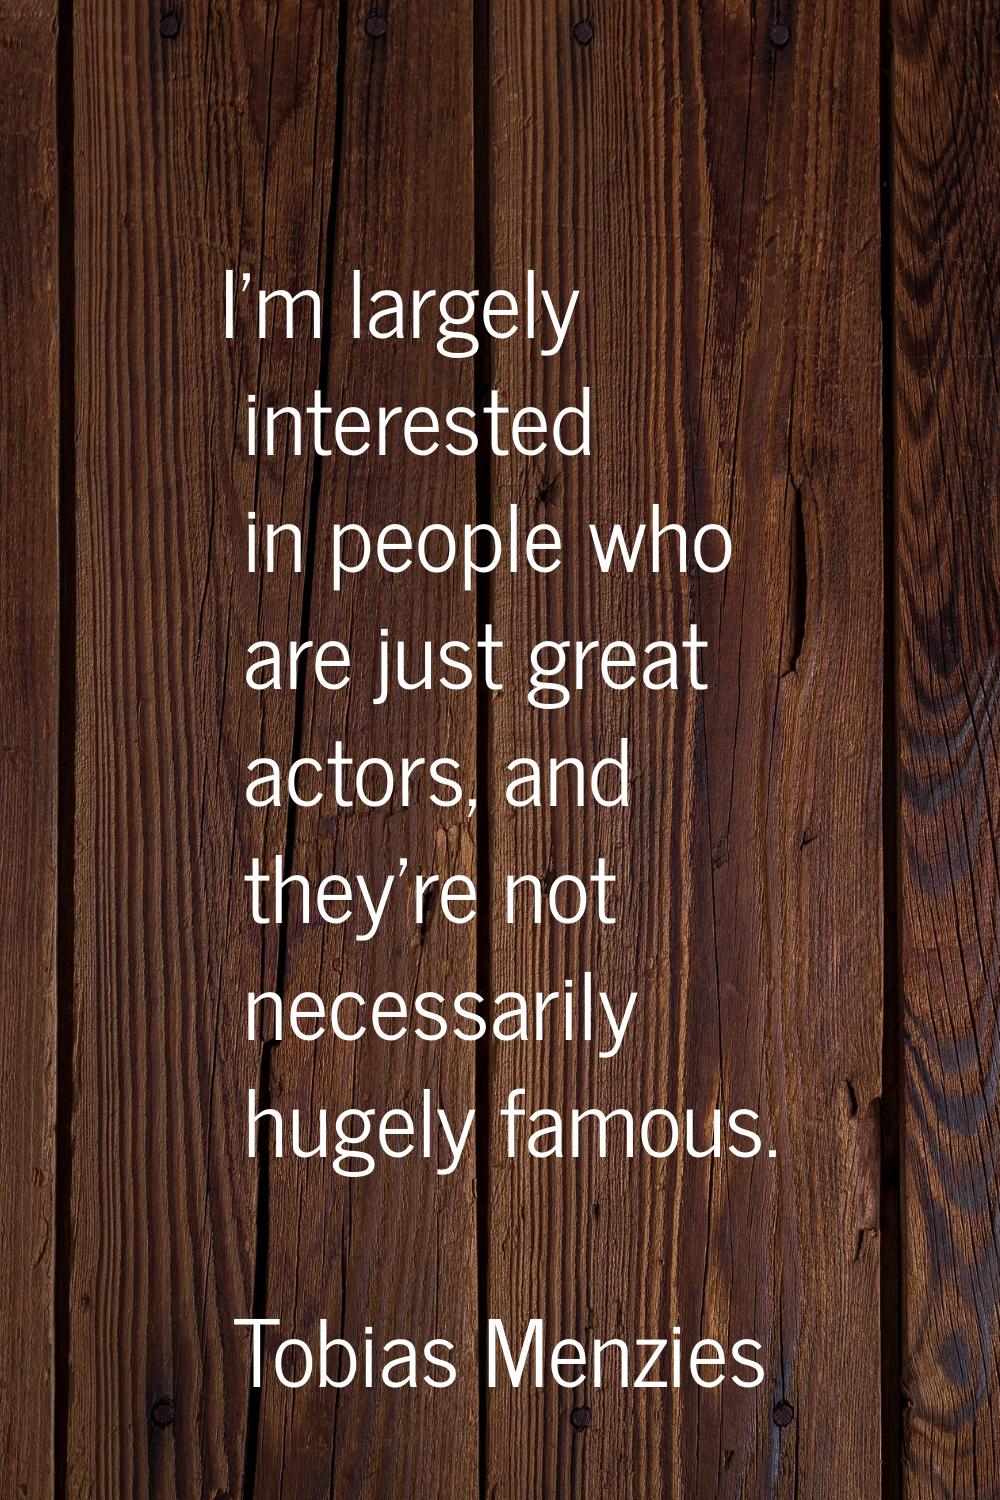 I'm largely interested in people who are just great actors, and they're not necessarily hugely famo